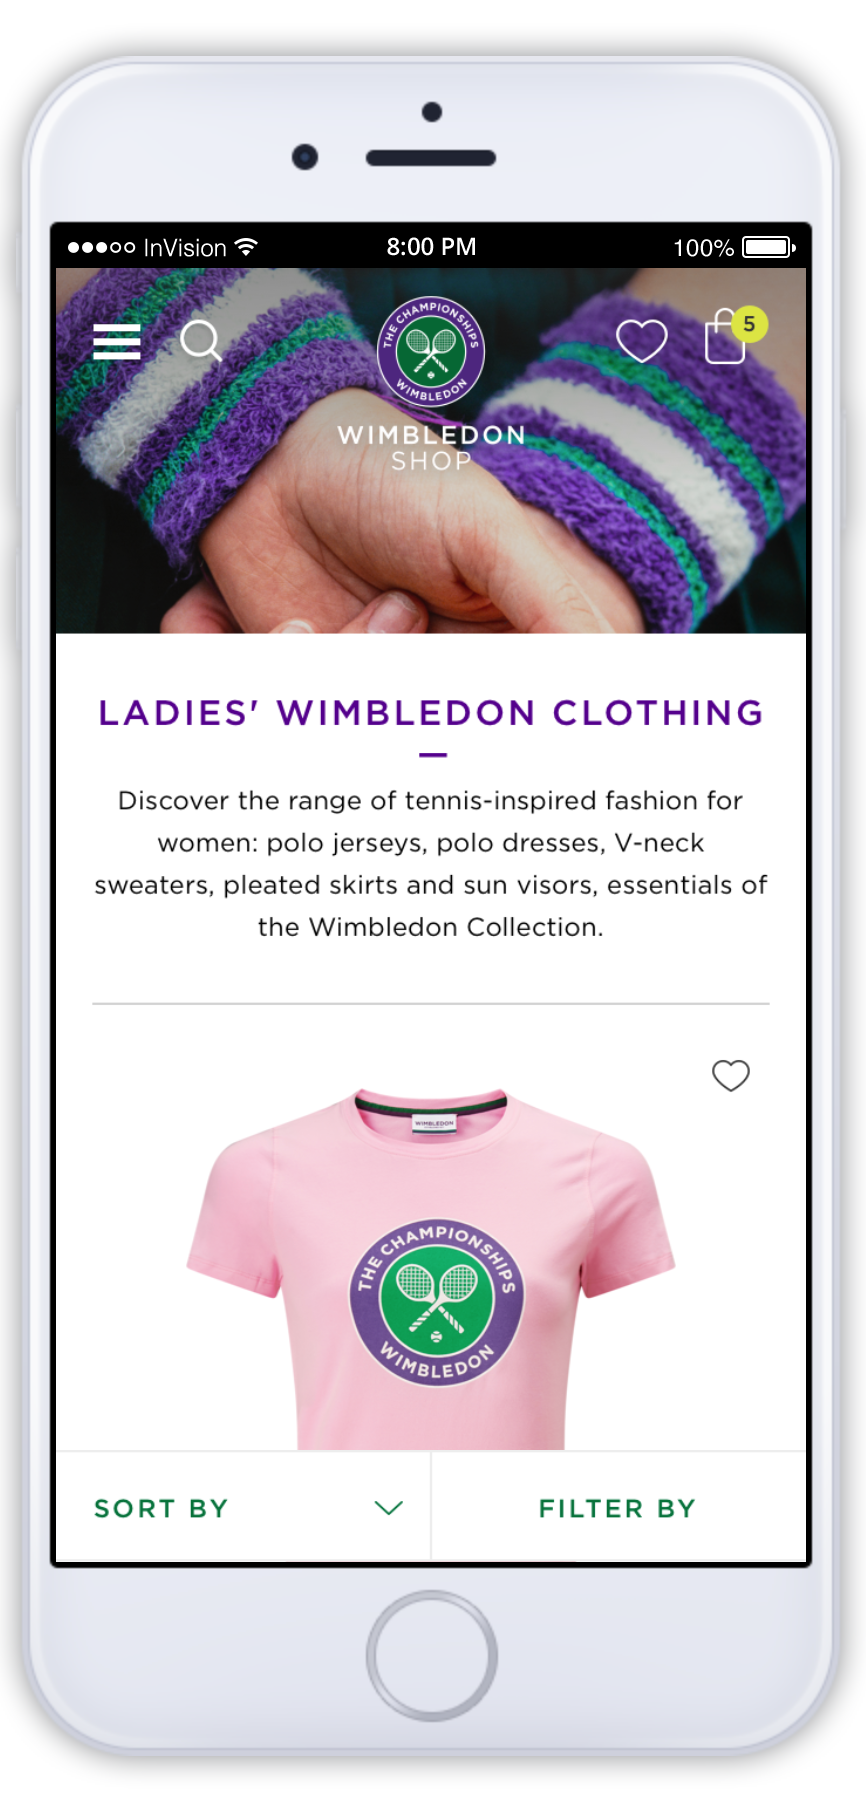 image of pink tshirt with wimbledon logo for sale on online store viewed on a tablet